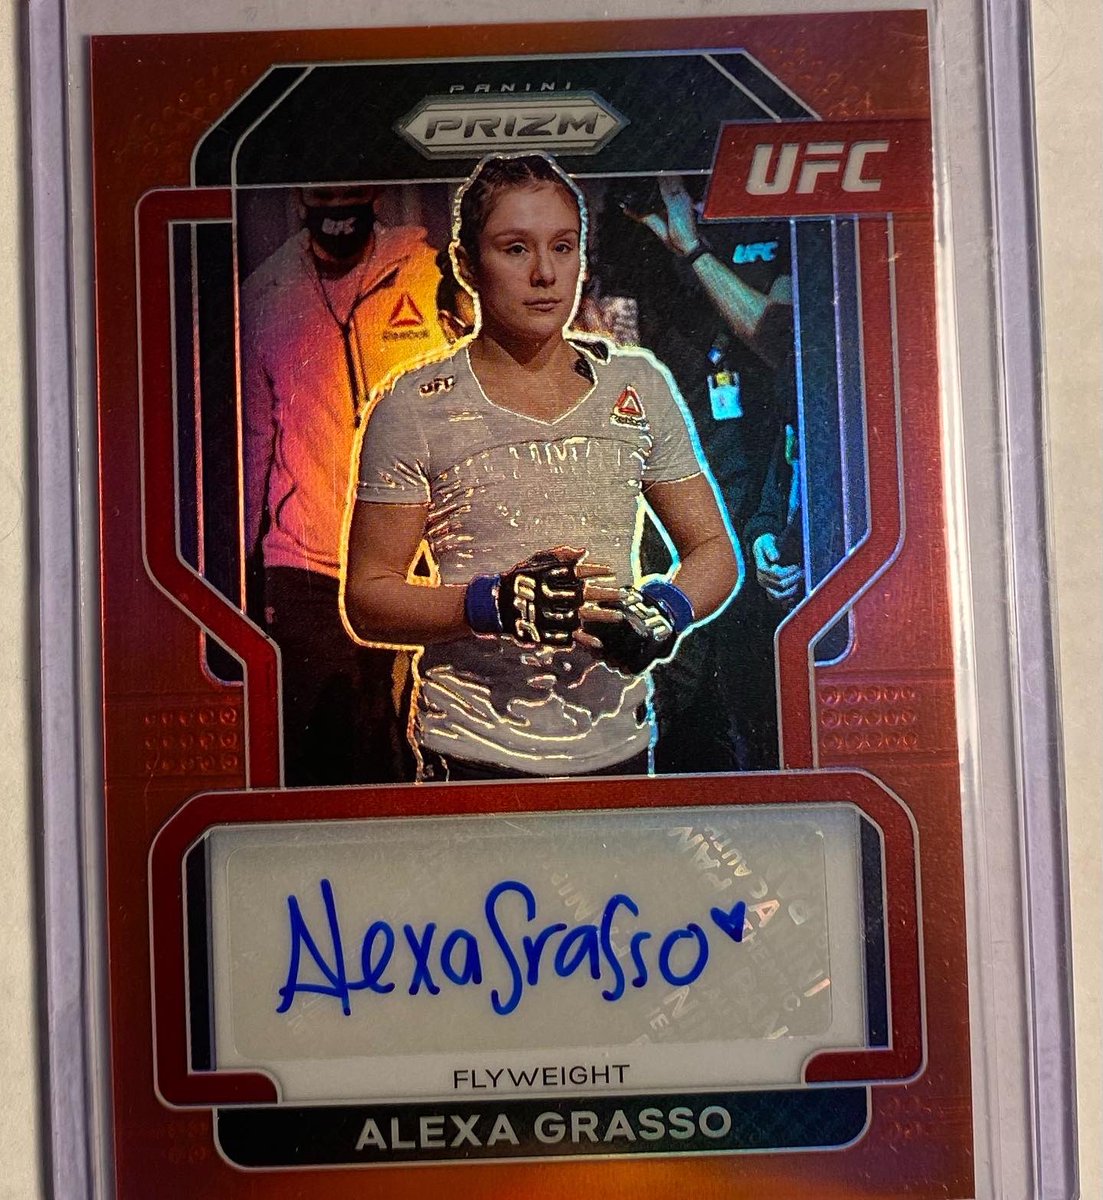 RT @TGNCards: @CollectionRbt Alexa Grasso true red — $45
Amanda Nunes /50 — $45
Aaron Judge rookie lot - $40 https://t.co/cppBrwRJUY